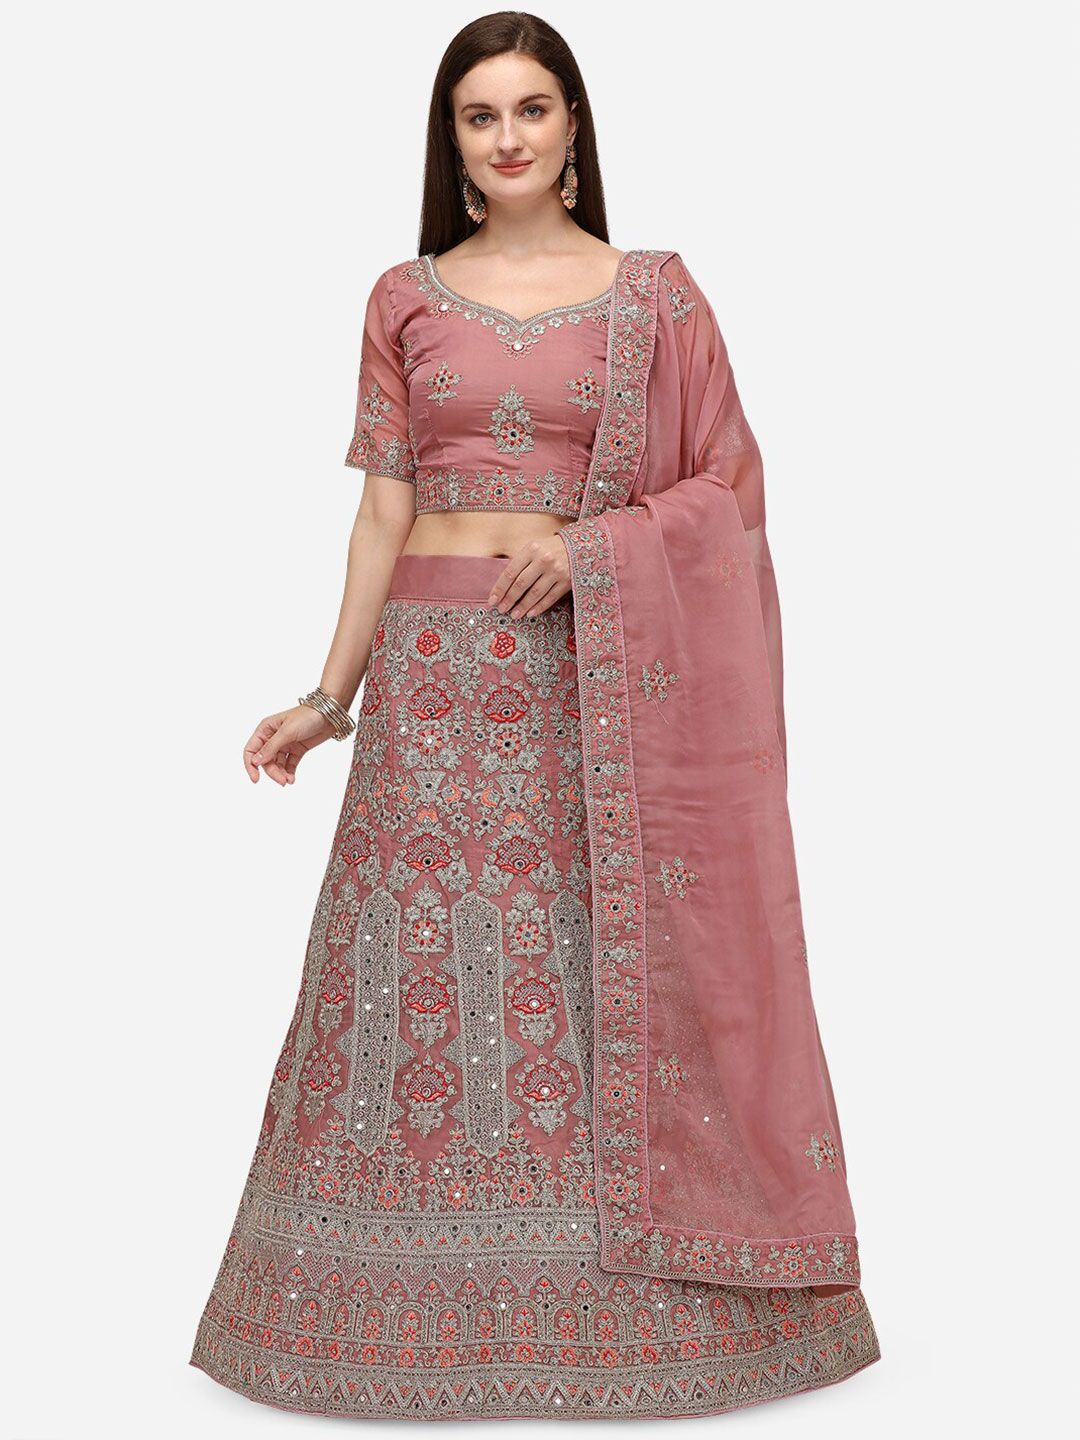 Netram Lavender & Grey Embroidered Mirror Work Semi-Stitched Lehenga & Unstitched Blouse With Dupatta Price in India